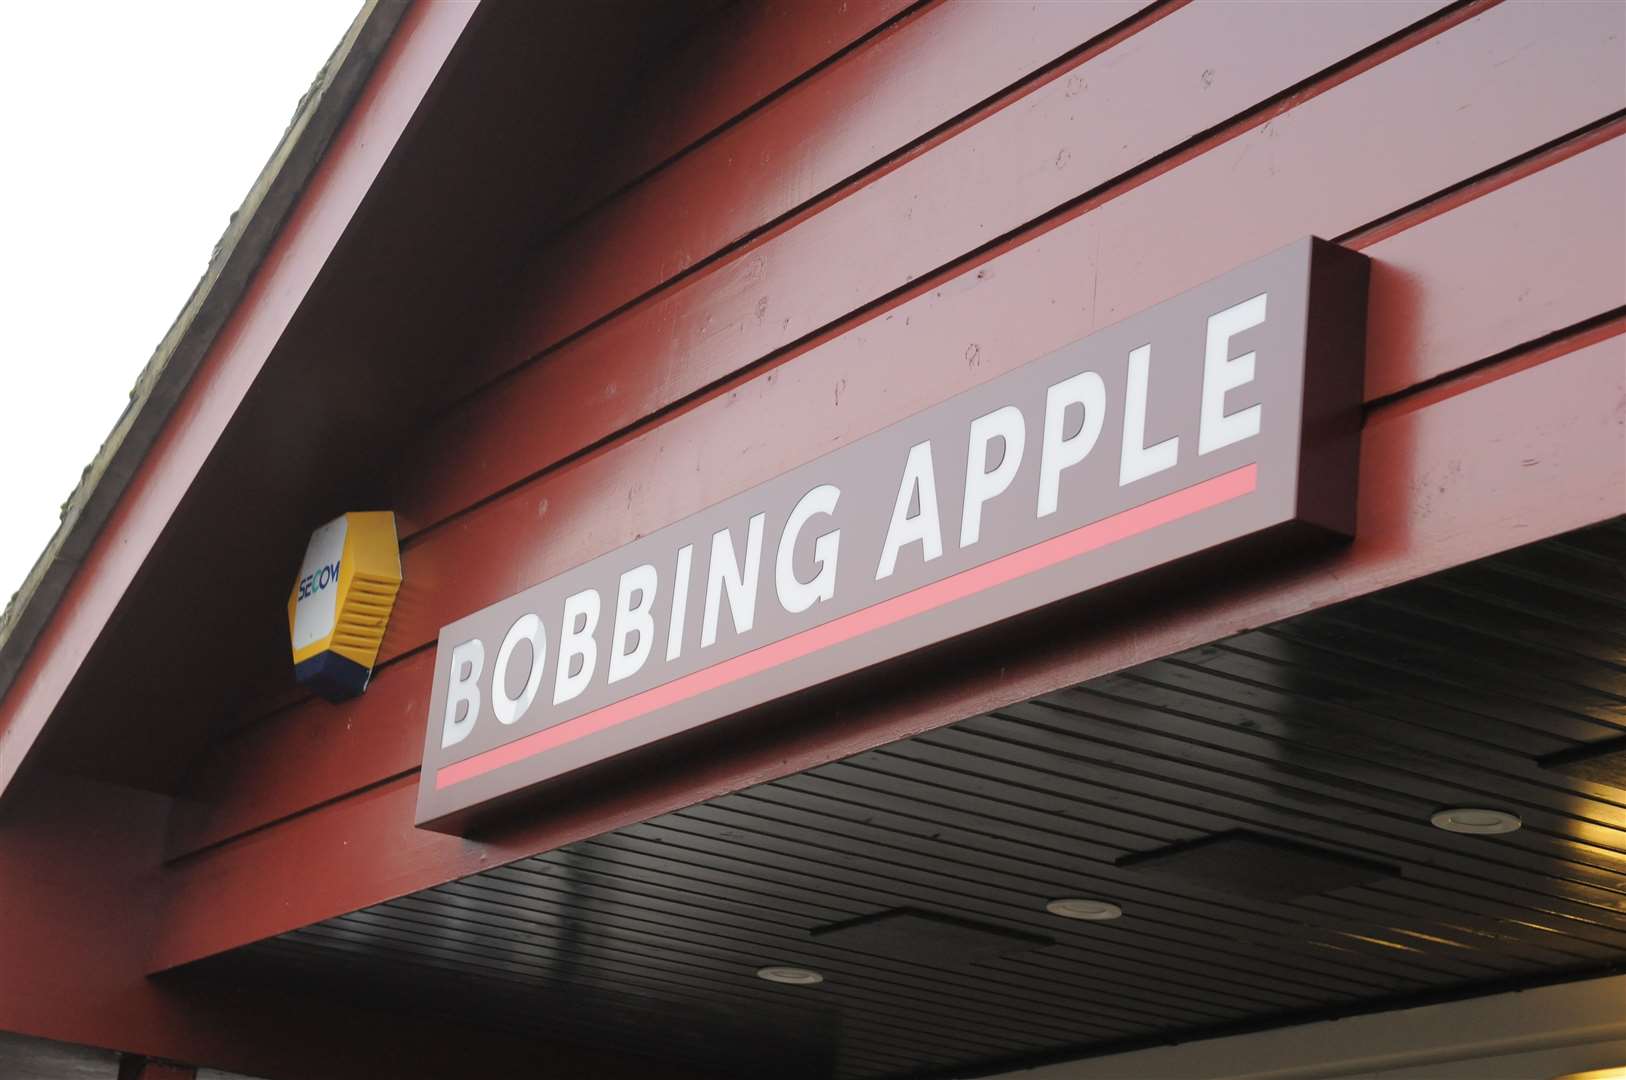 People were left with a bigger bill than expected after visiting the Bobbing Apple. Picture: Steve Crispe